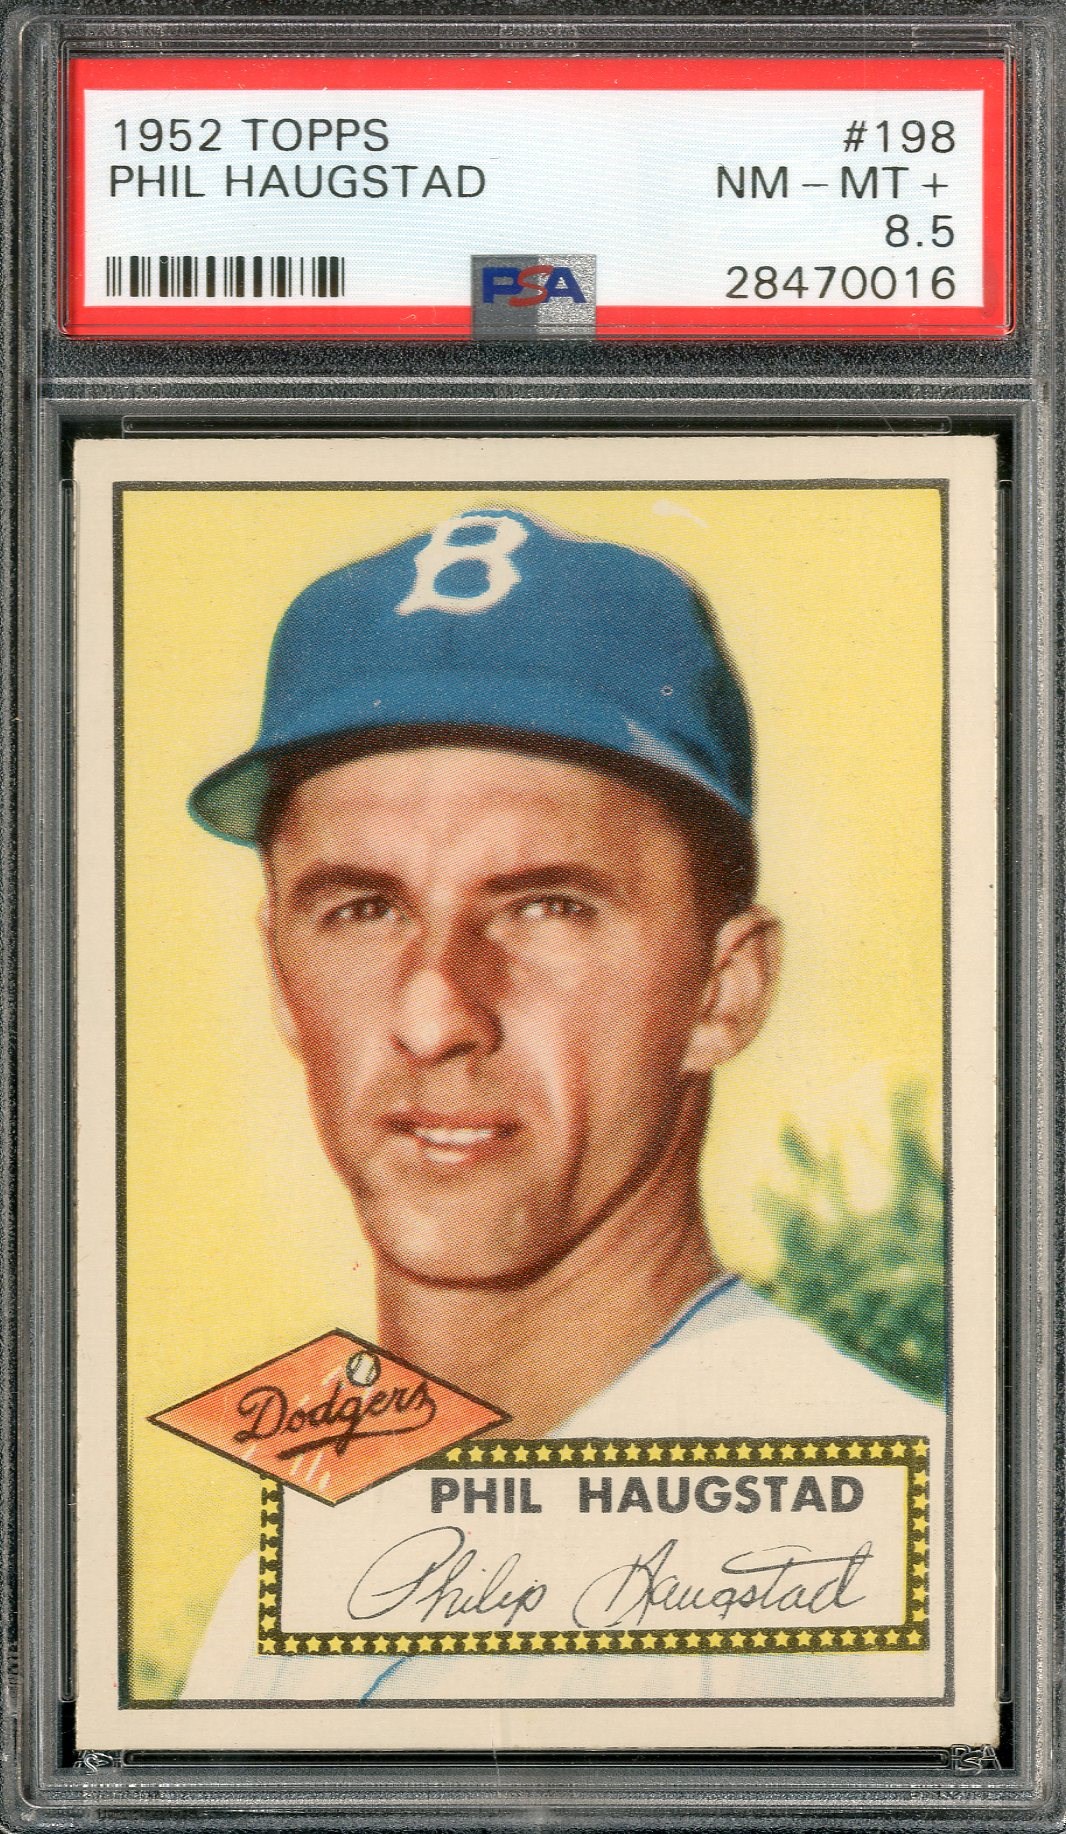 Bubba Phillips Autographed 1959 Topps Card #187 Chicago White Sox